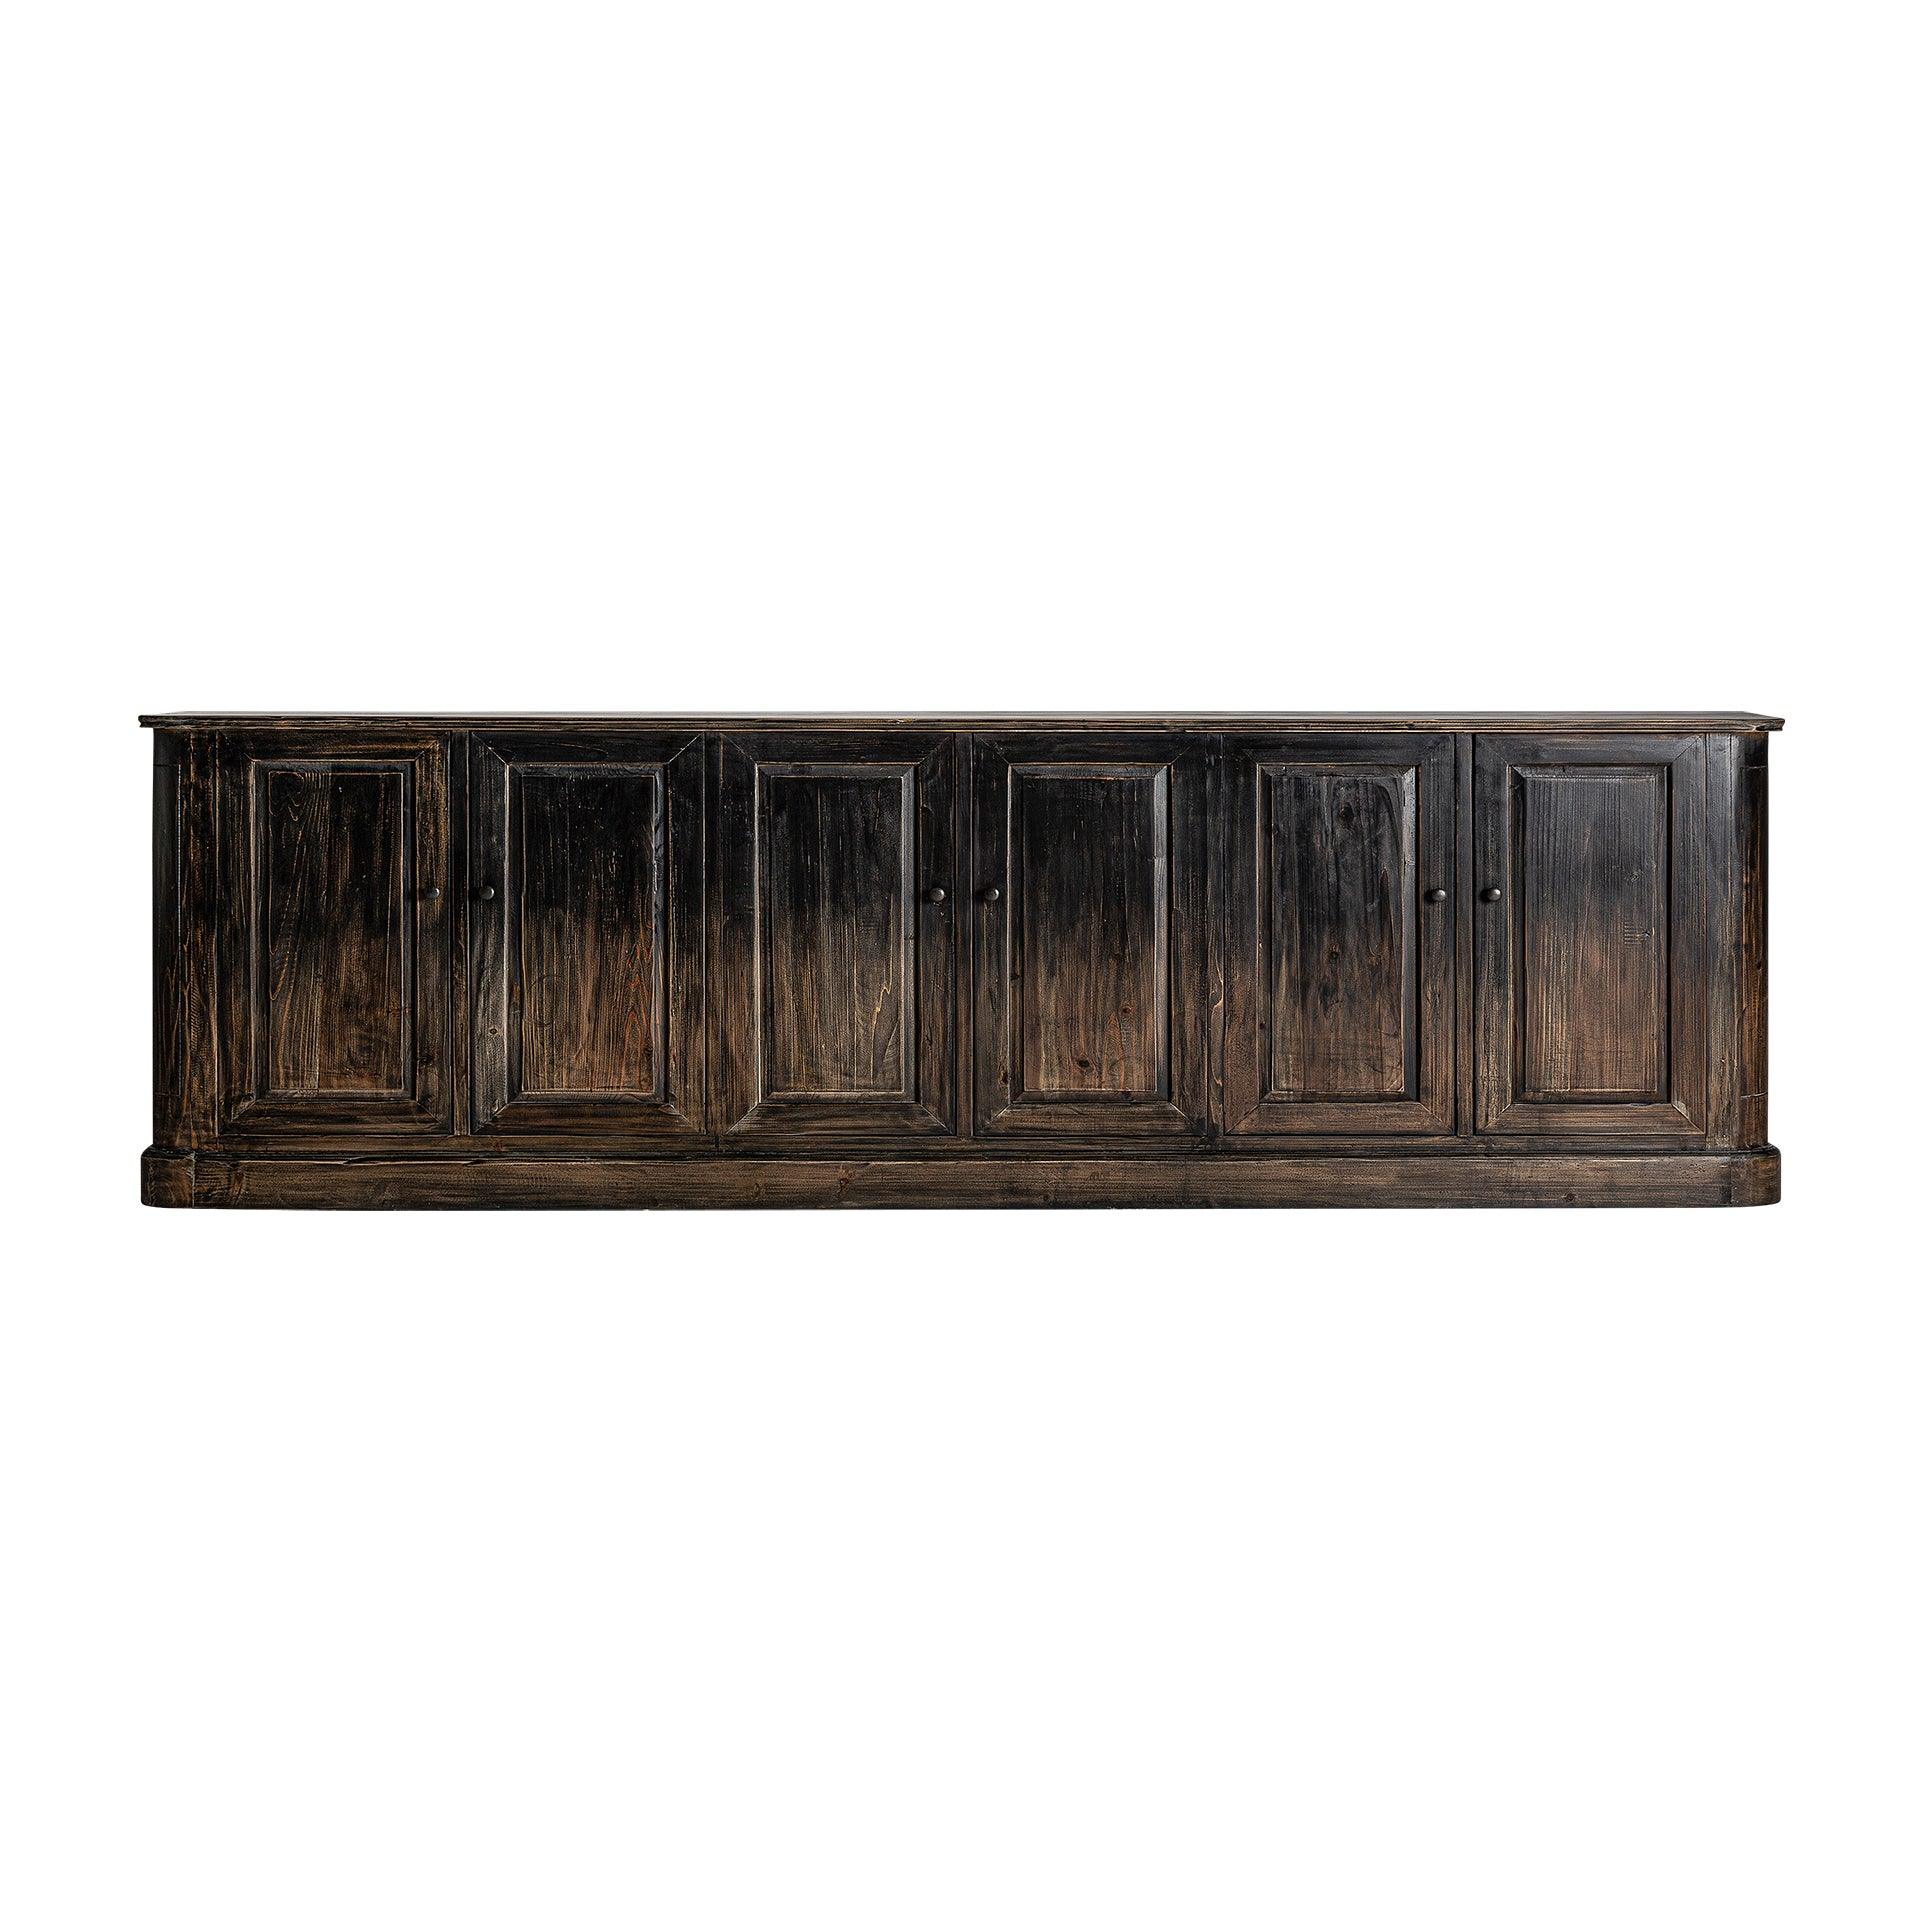 Svanhild Recycled Pine Wood Low Sideboard - Maison Rêves UK